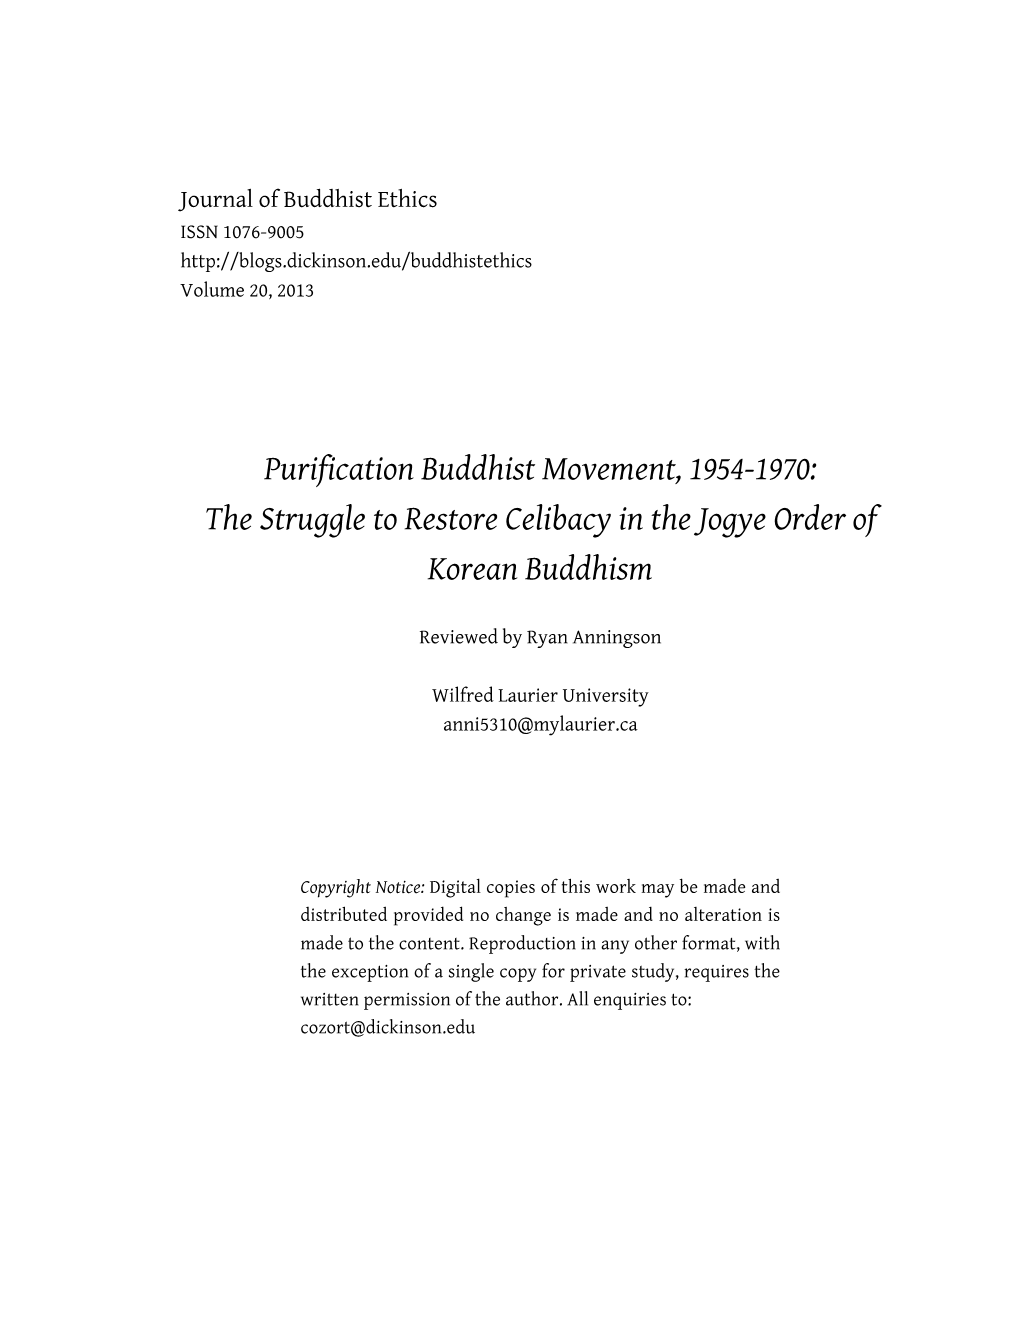 Purification Buddhist Movement, 1954-1970: the Struggle to Restore Celibacy in the Jogye Order of Korean Buddhism